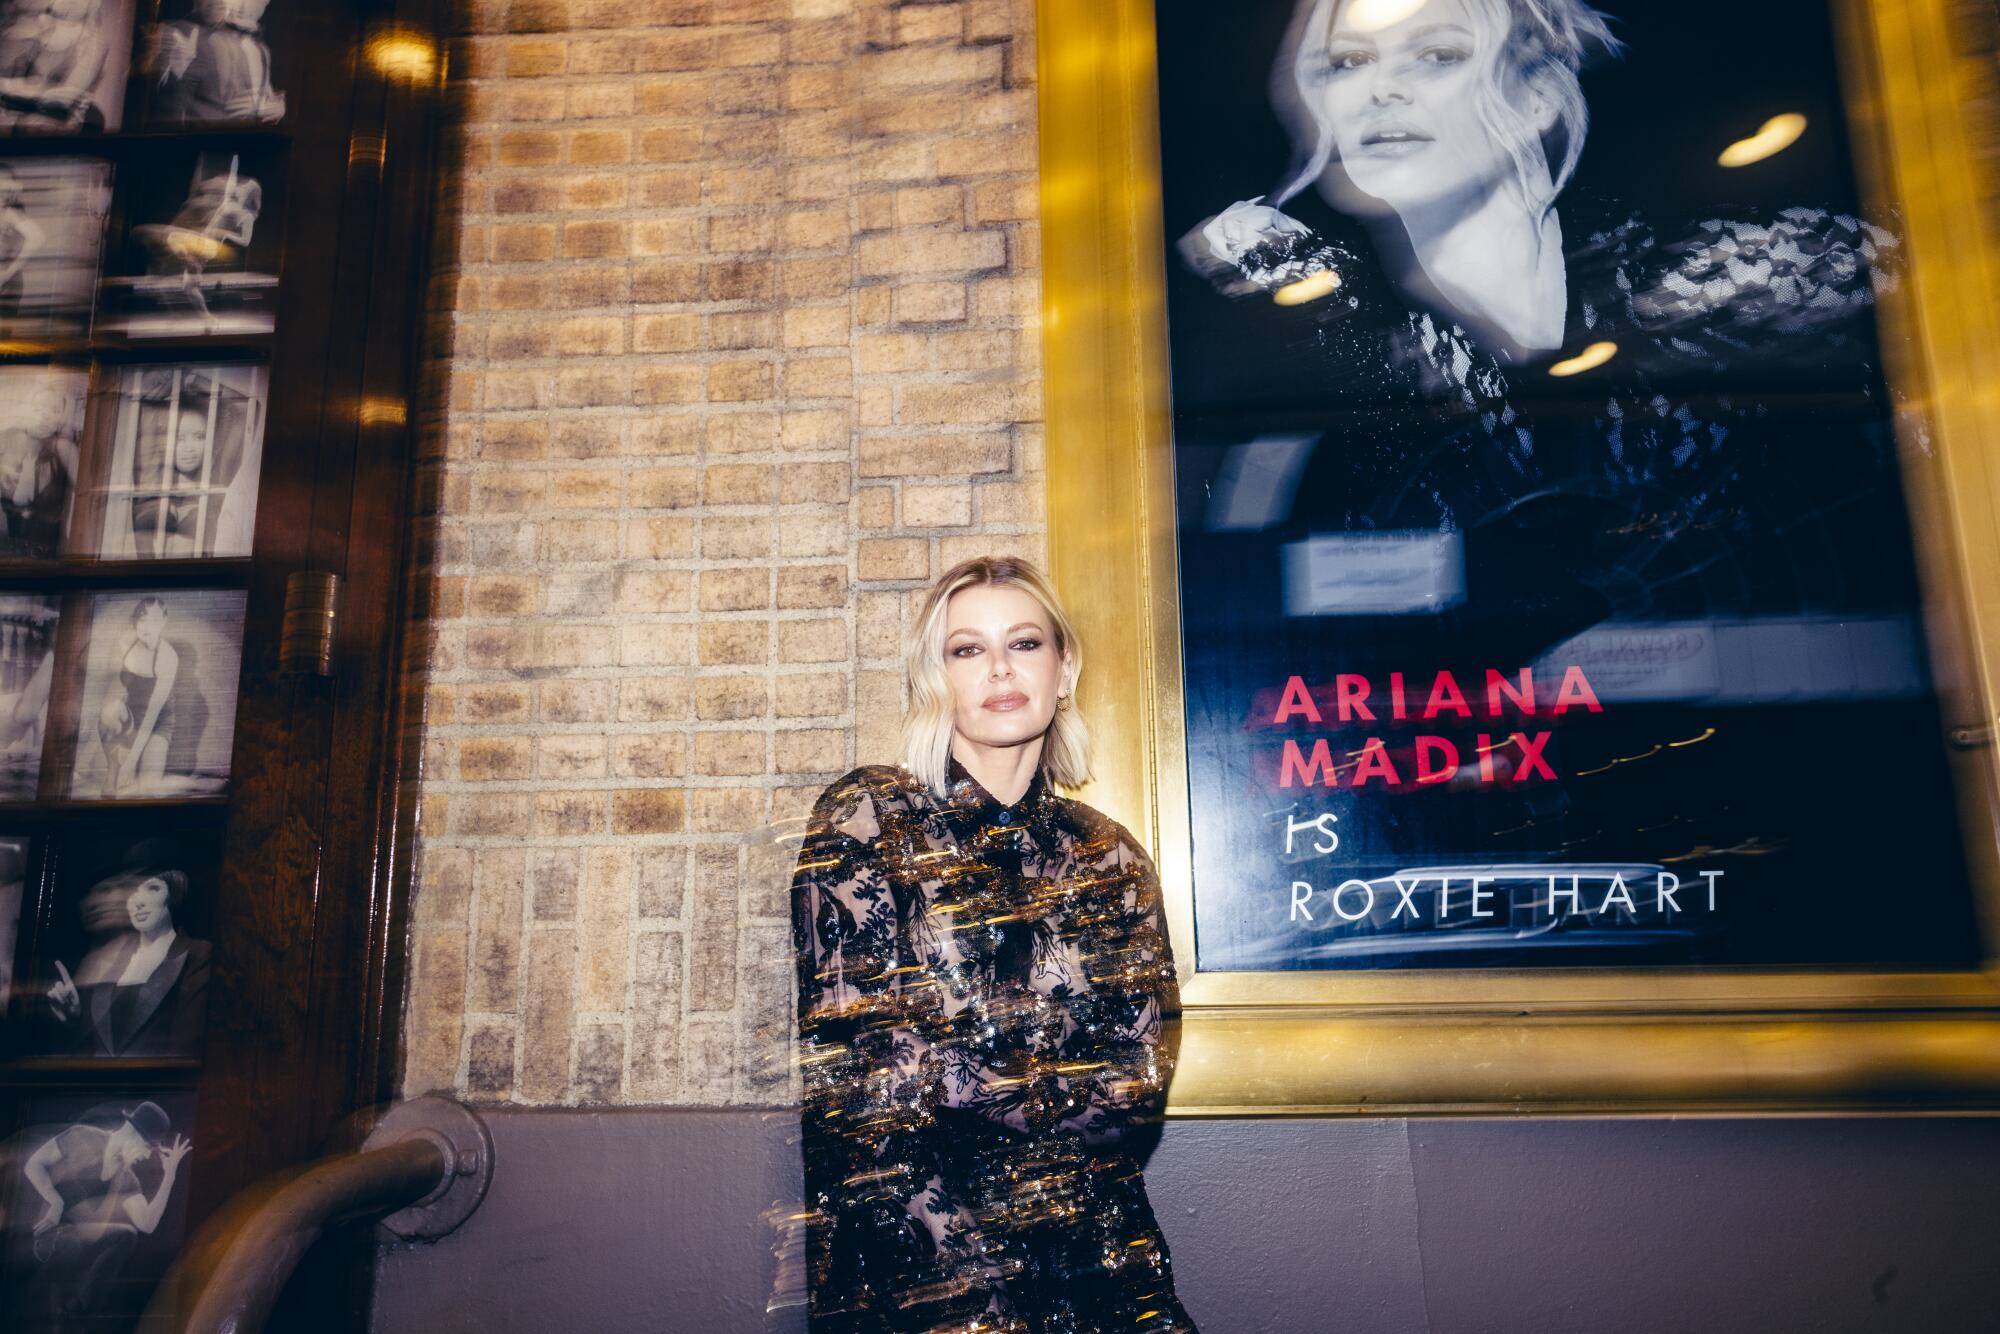 Ariana Madix stands next to a poster advertising her as Roxie Hart in "Chicago" at Broadway's Ambassador Theater